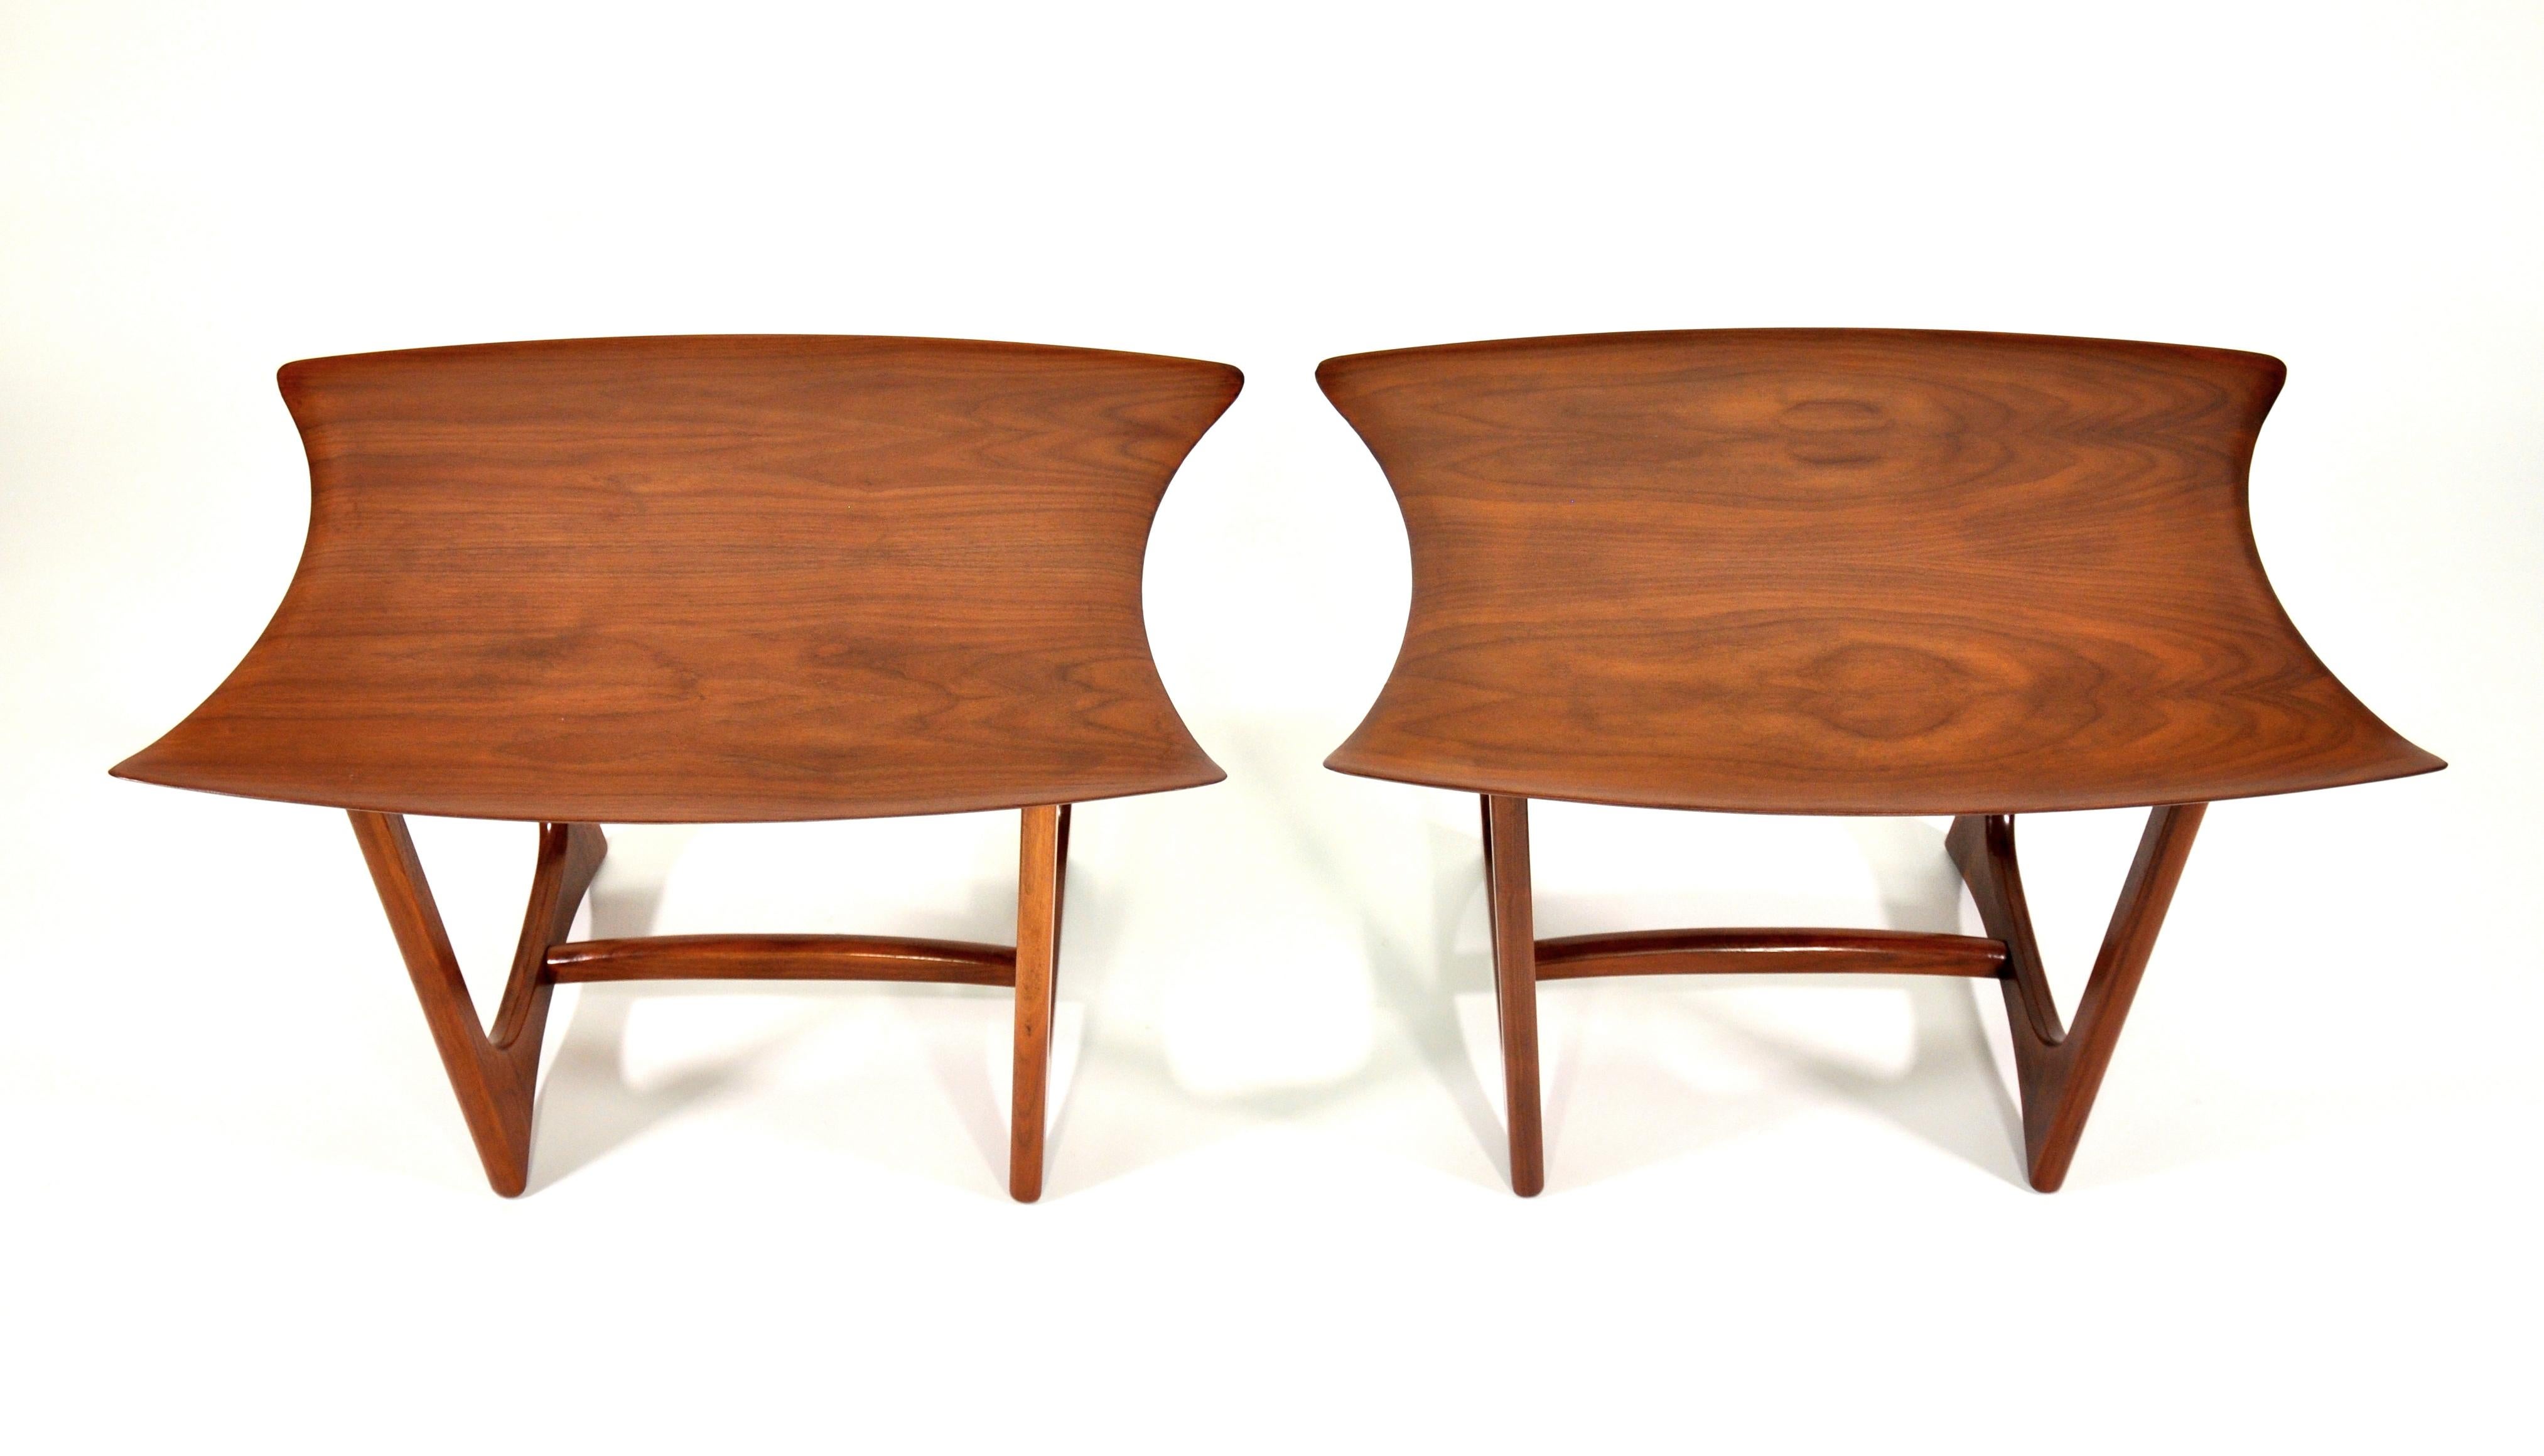 20th Century Pair of Adrian Pearsall Walnut Stingray Tables by Craft Associates, 1950s